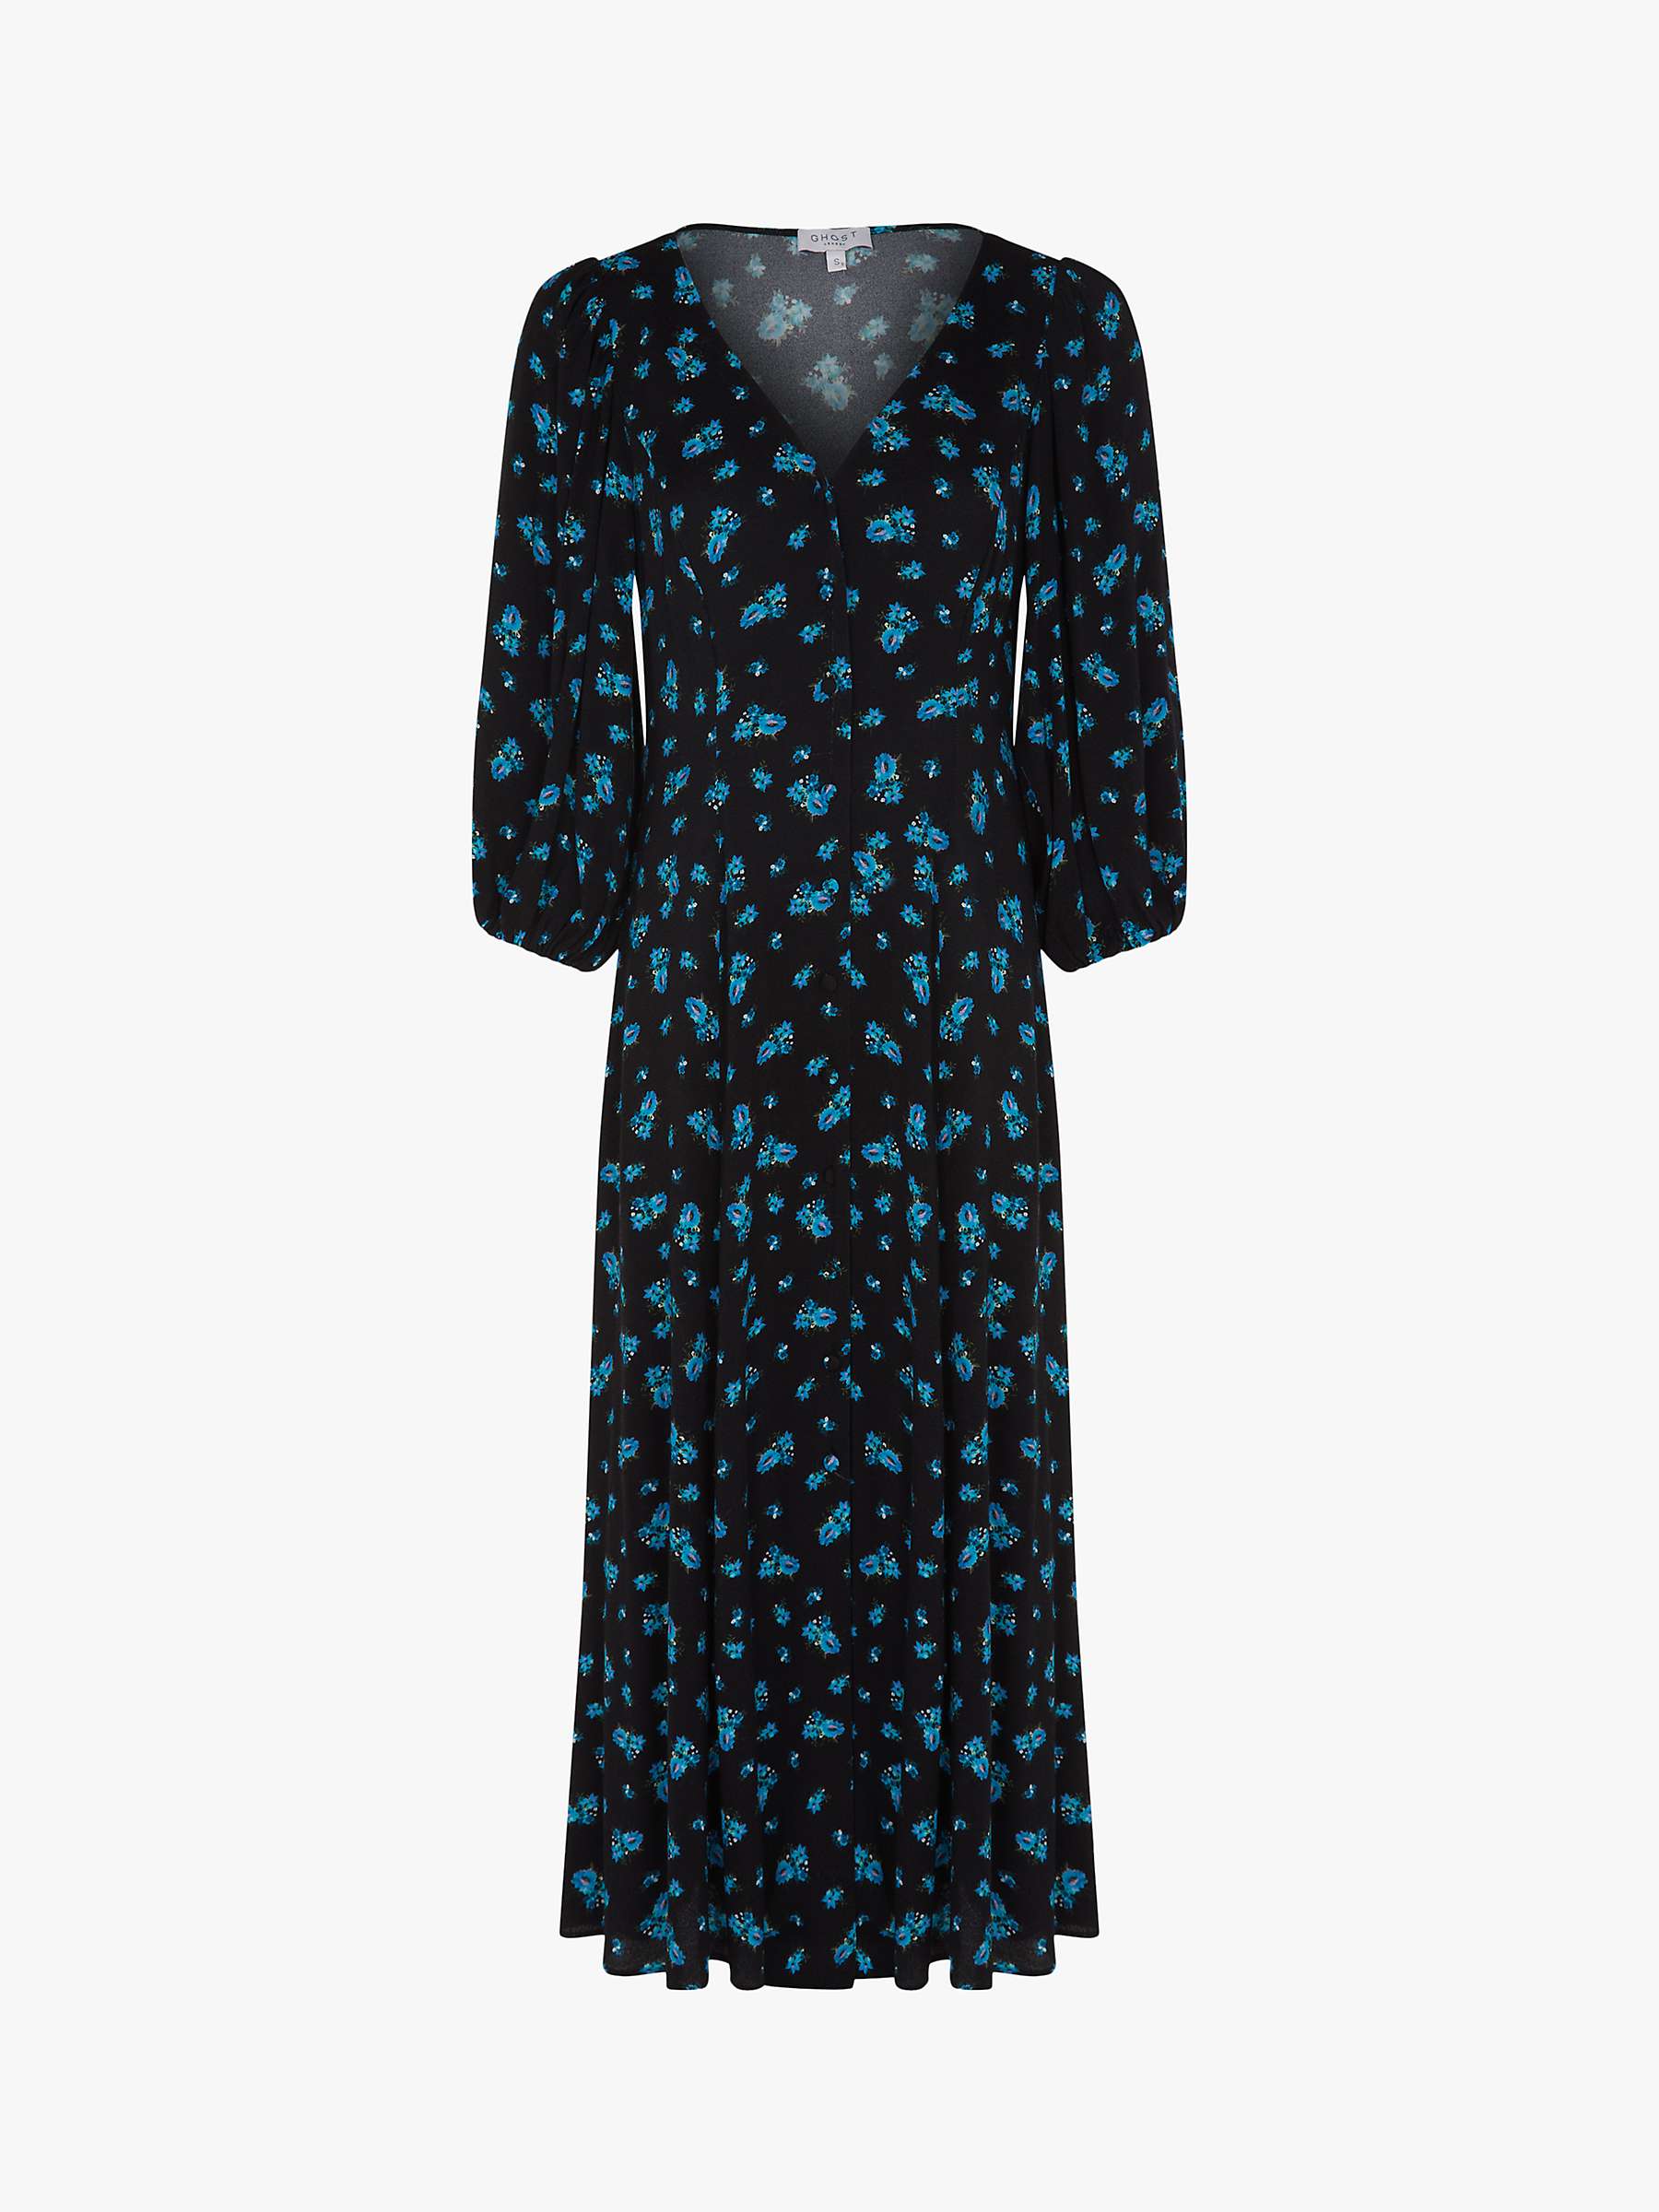 Buy Ghost Ava Floral Midi Dress, Bouquet/Black/Turquoise Online at johnlewis.com